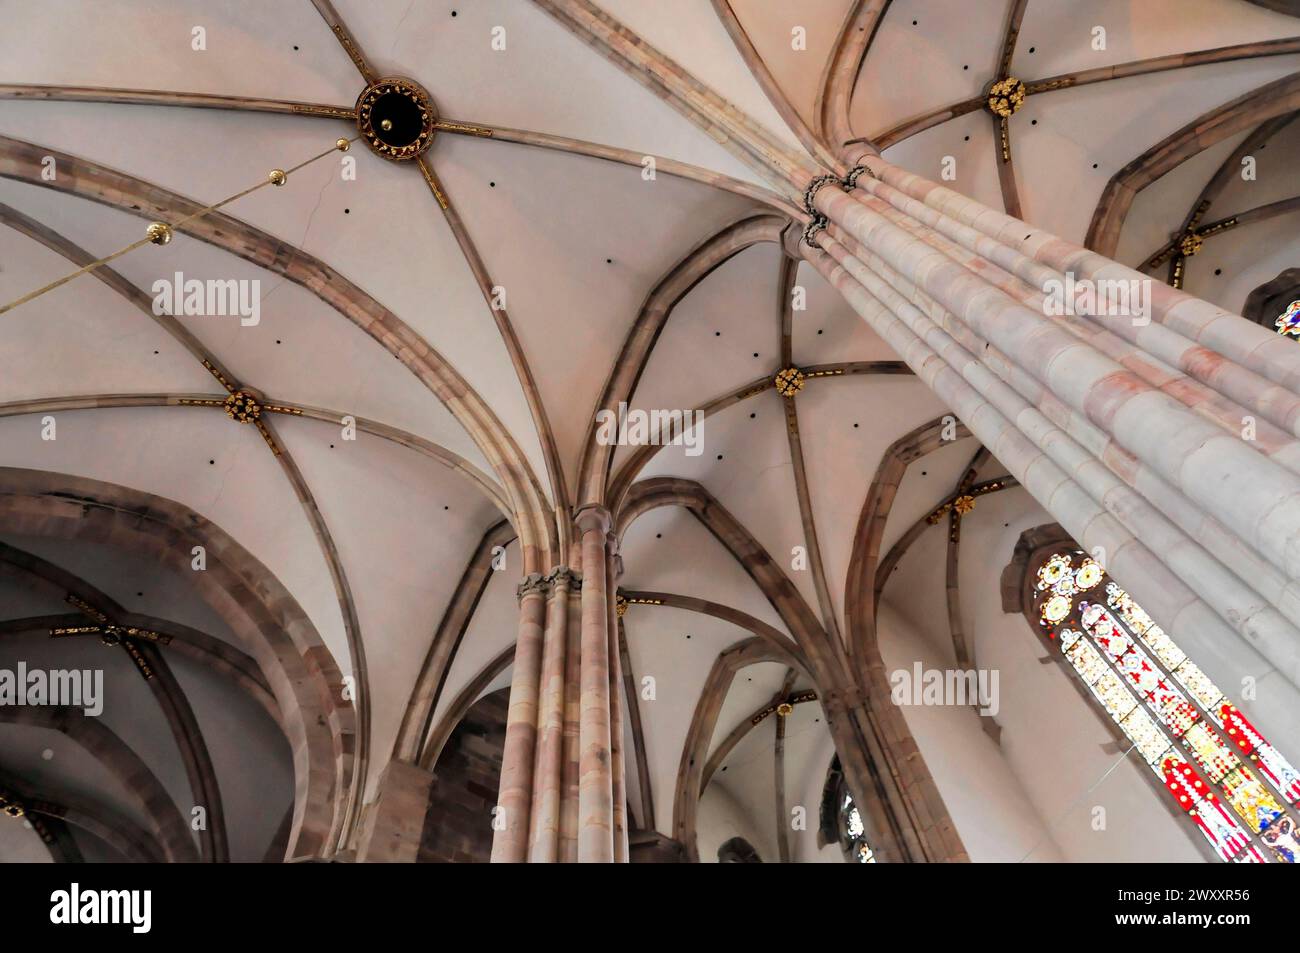 The Lutheran Church of St Thomas, Eglise Saint Thomas de Strasbourg, Alsace, Vaulted ceiling and columns inside a church with Gothic architecture Stock Photo